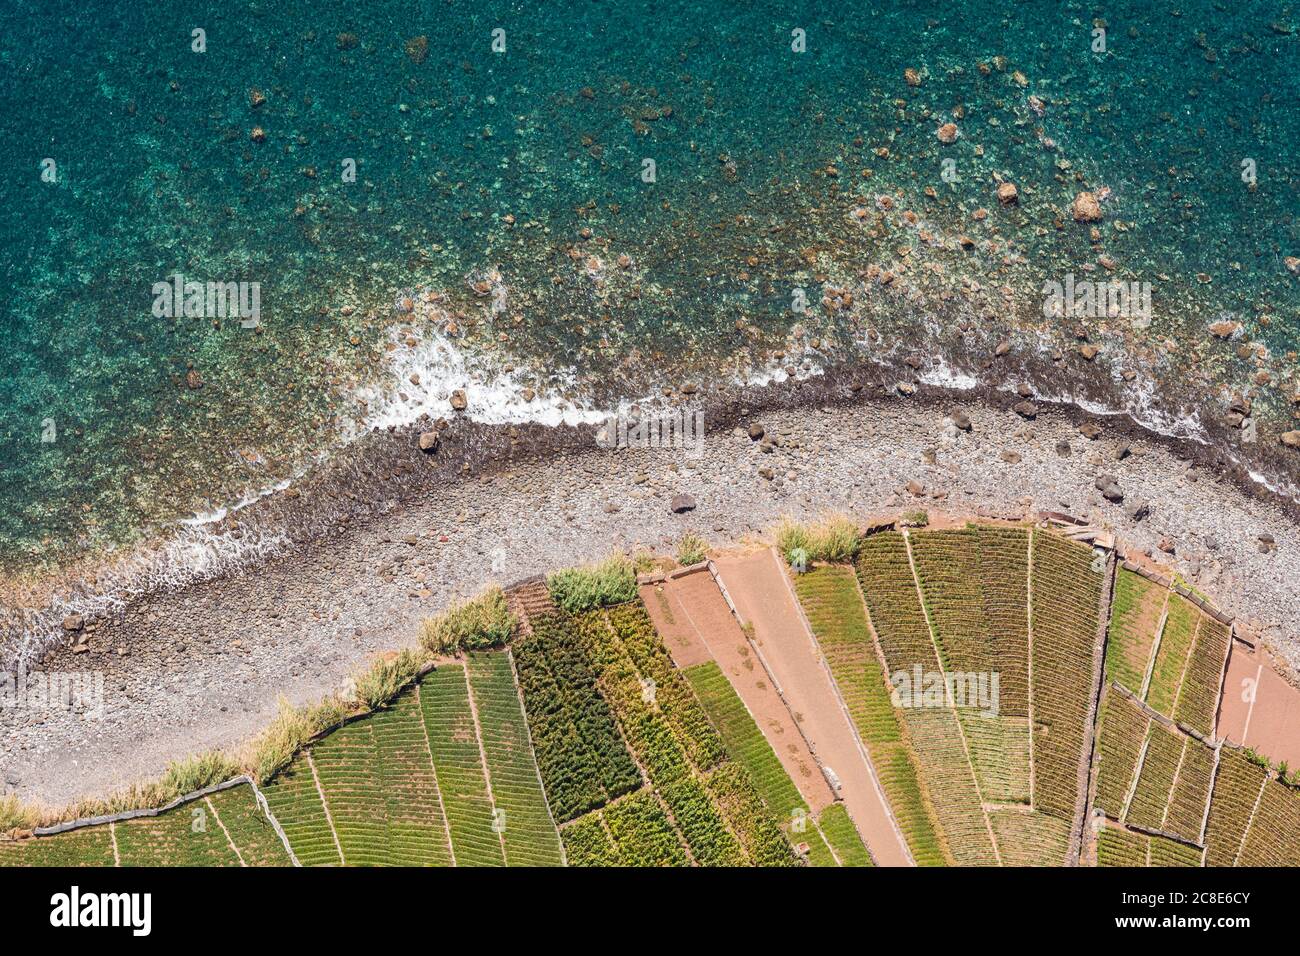 Portugal, Coastal beach and agricultural fields seen from top of Cabo Girao cliff Stock Photo